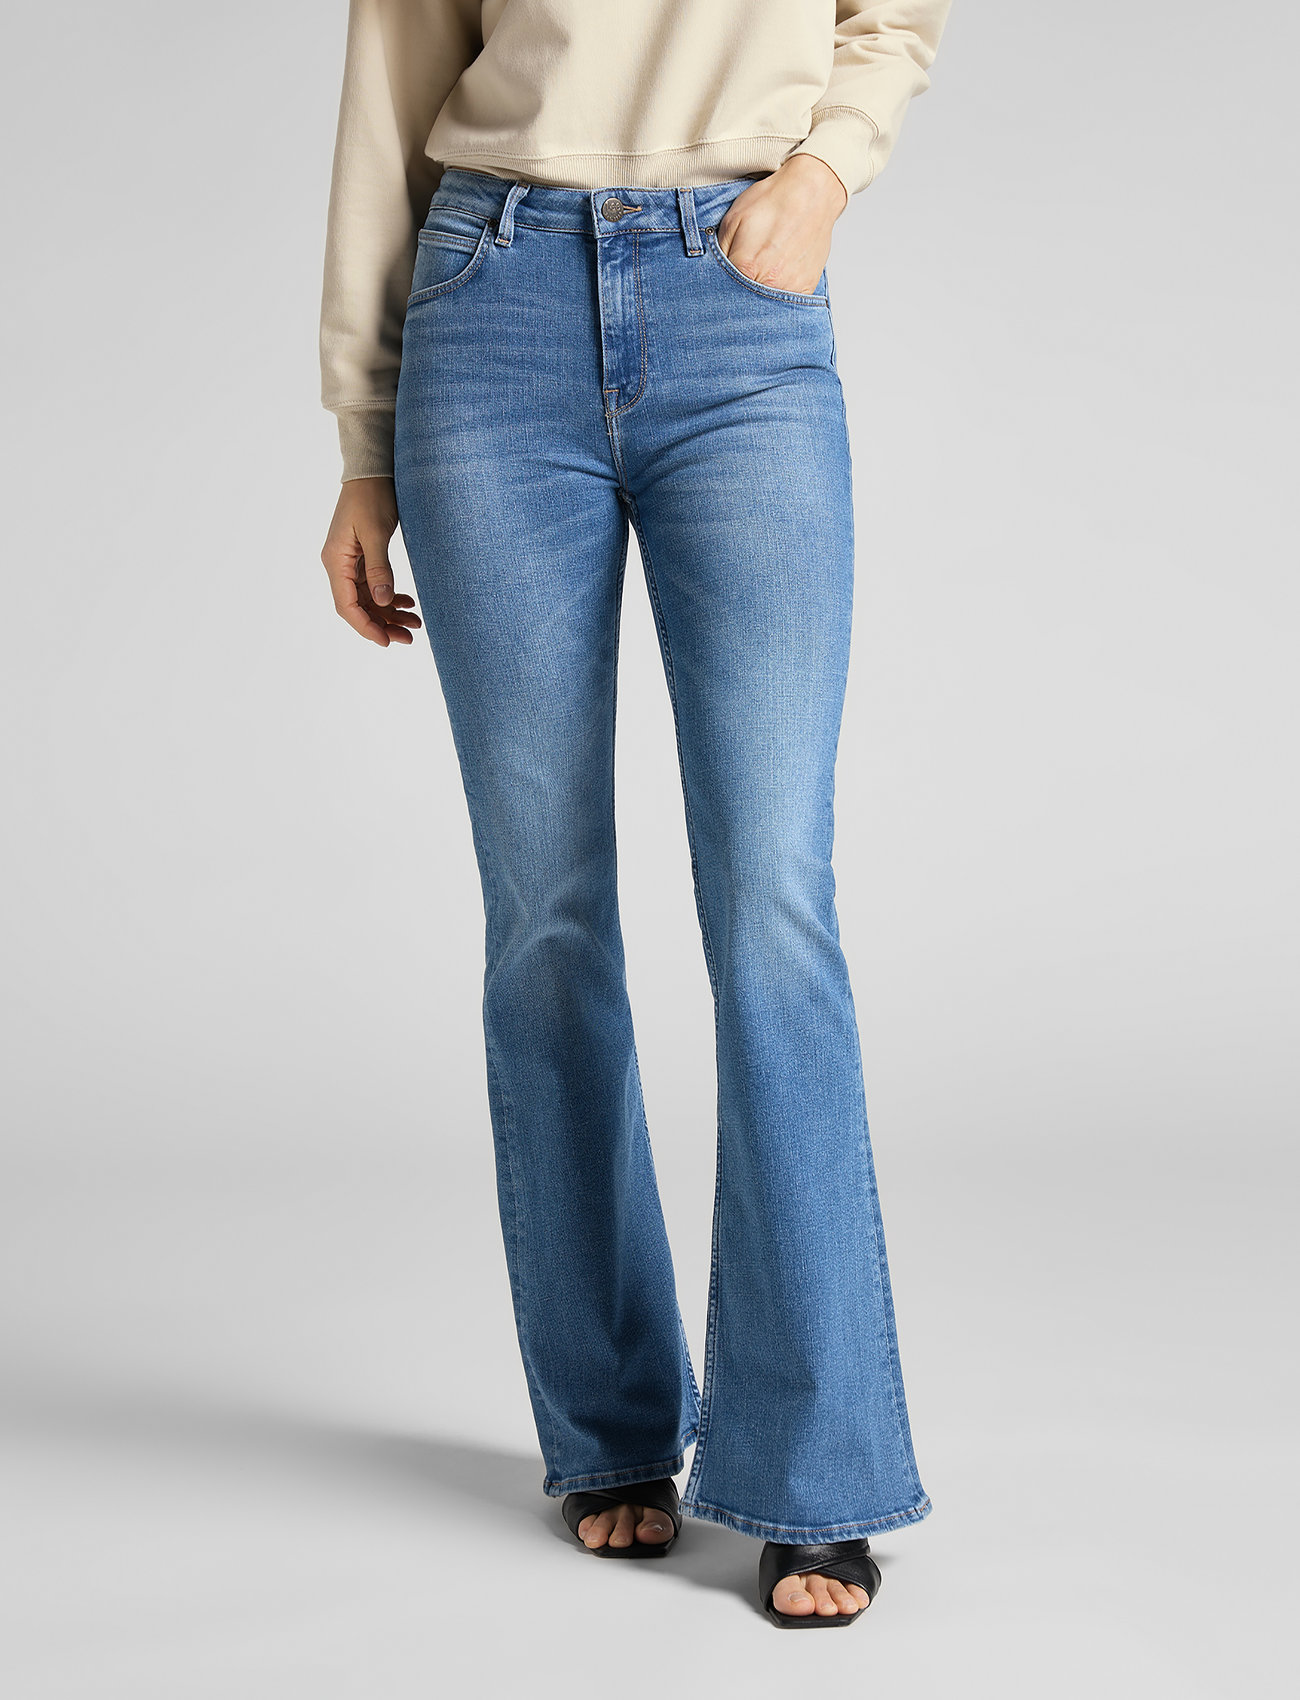 Lee Jeans - BREESE - flared jeans - jaded - 0